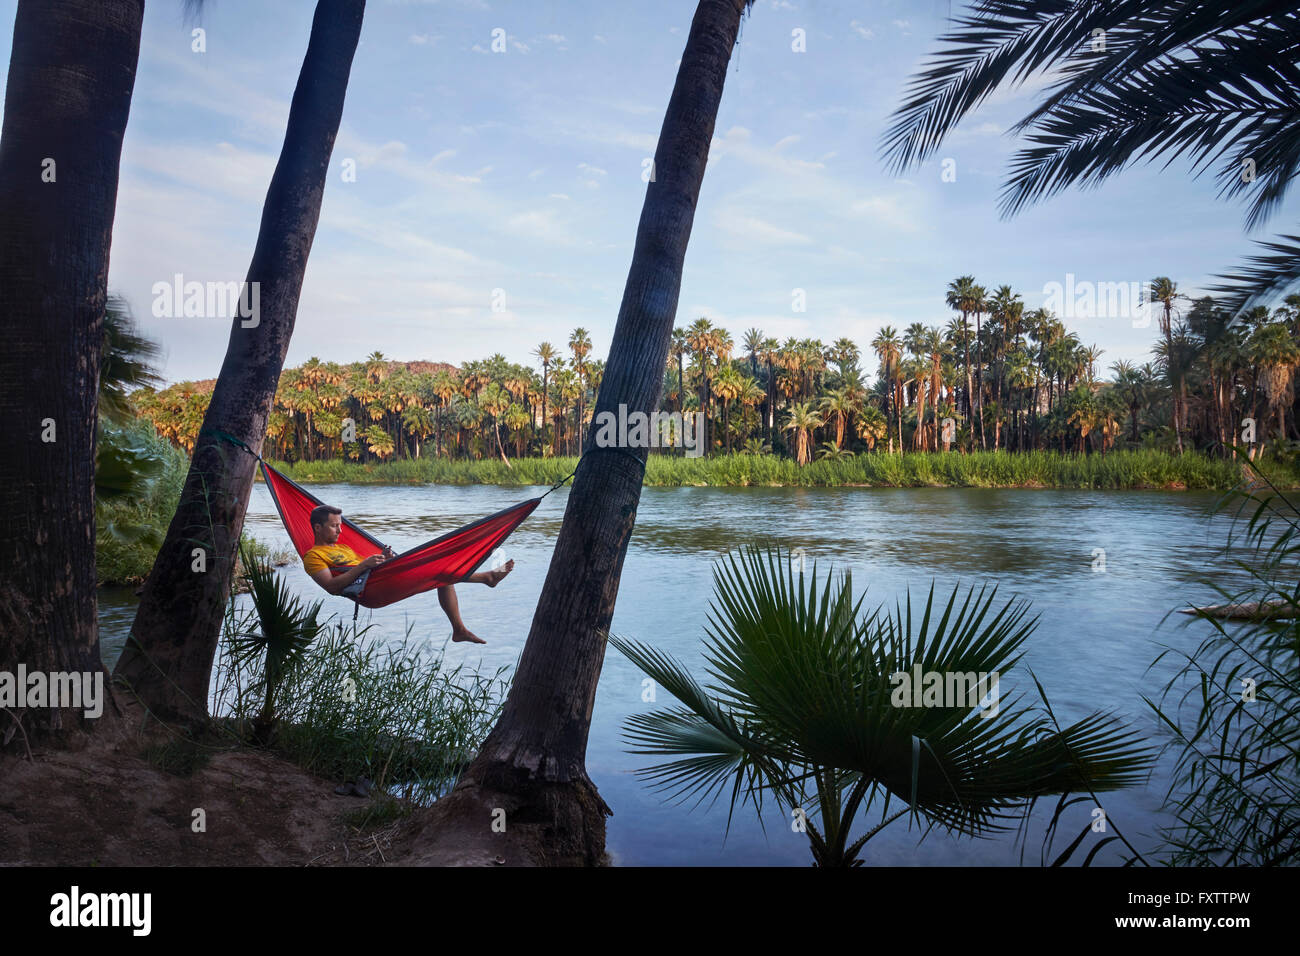 Man relaxing in hammock by lake, Baja California, Mexique Banque D'Images